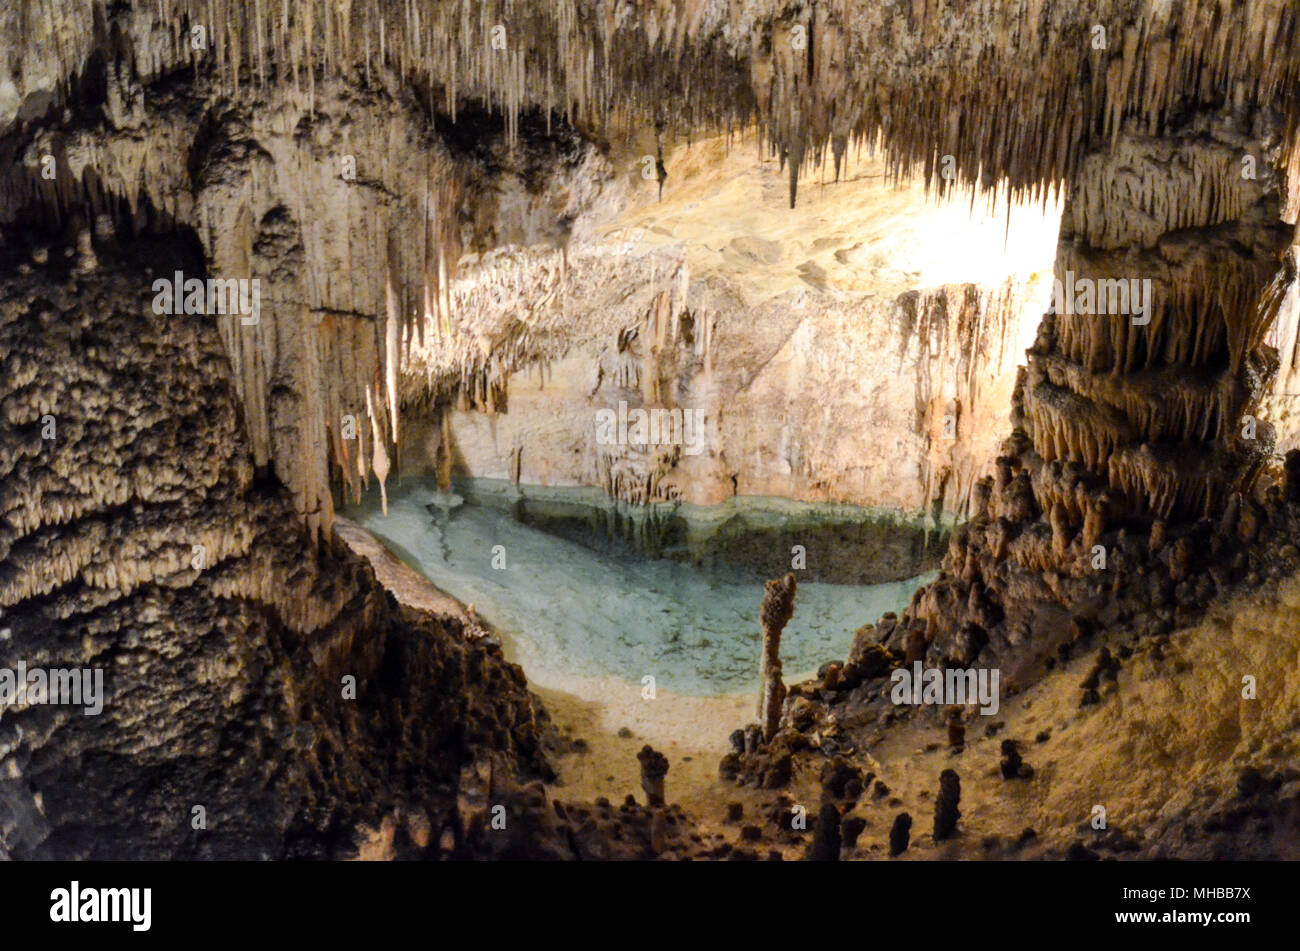 Underground experience at the Drach caves, Mallorca, Spain Stock Photo